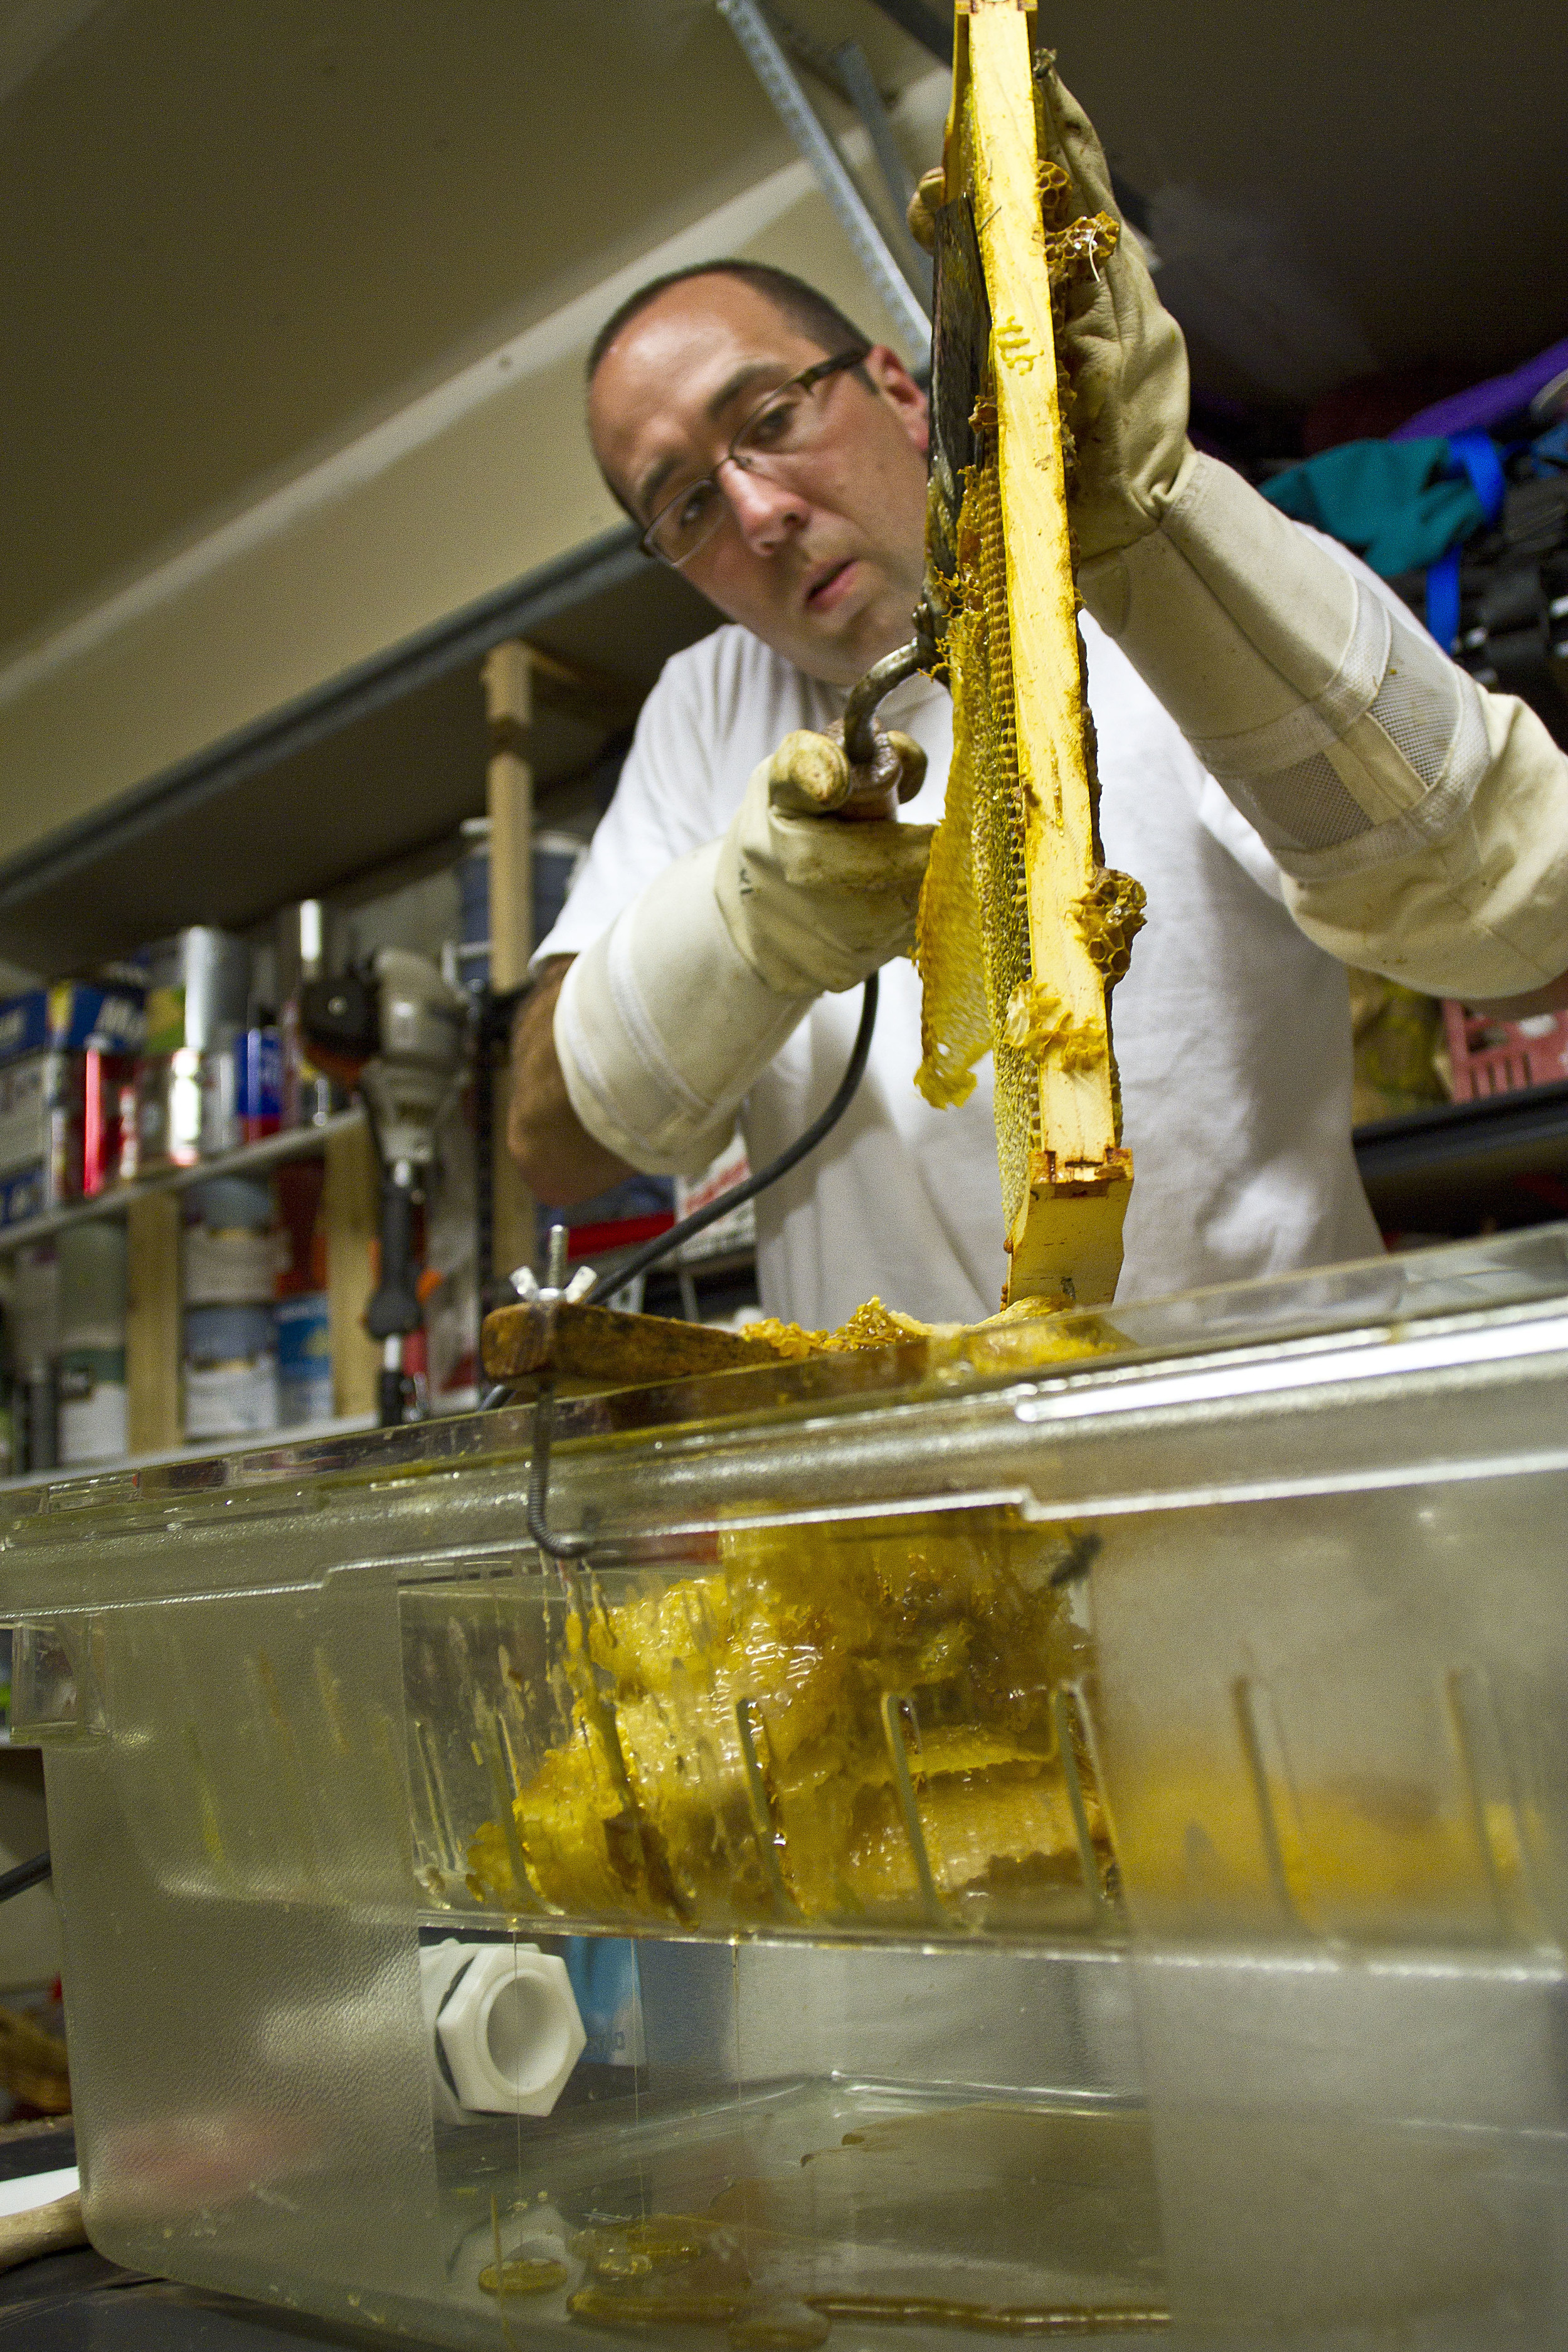   Allen Turnbull, a Bainbridge Island firefighter with two years of beekeeping experience, uncaps a frame of honey comb from one of his hives with a heated knife.&nbsp;  